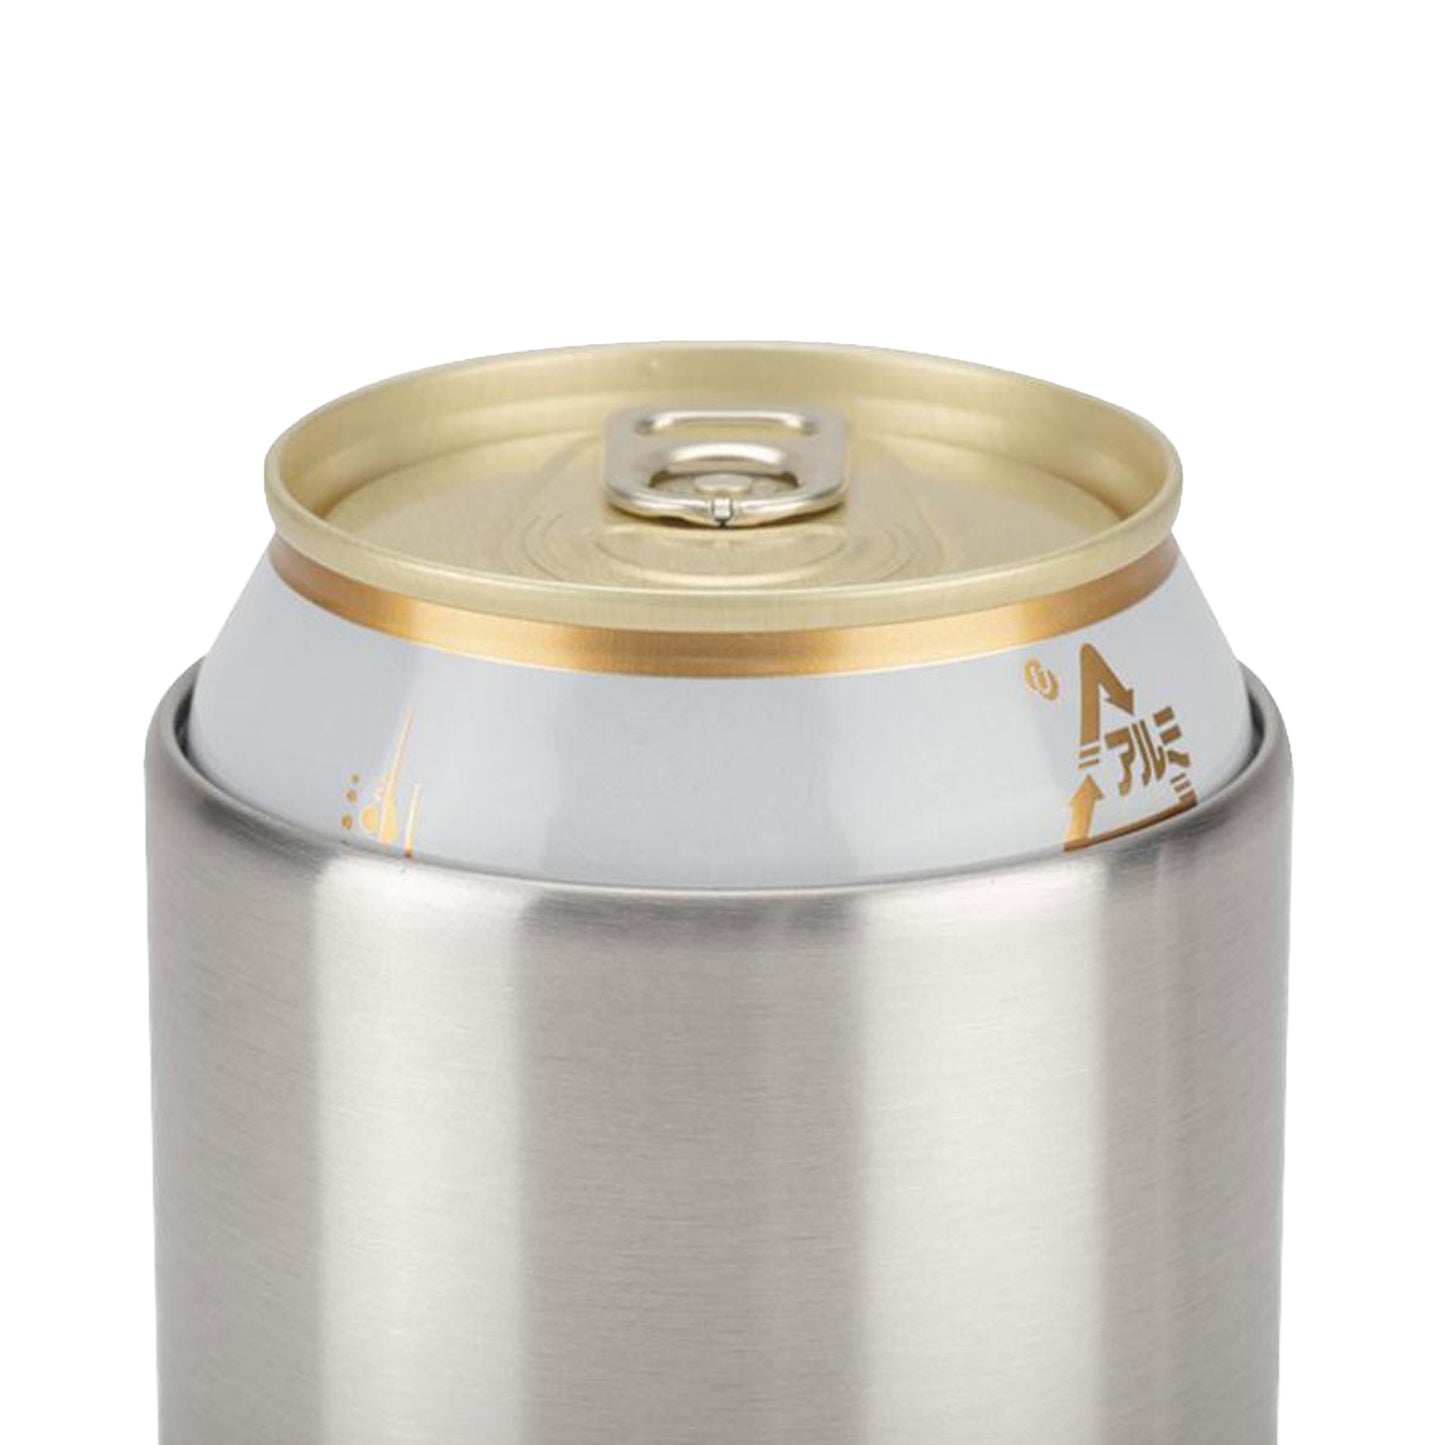 Snow Peak Stainless Steel Can Cooler